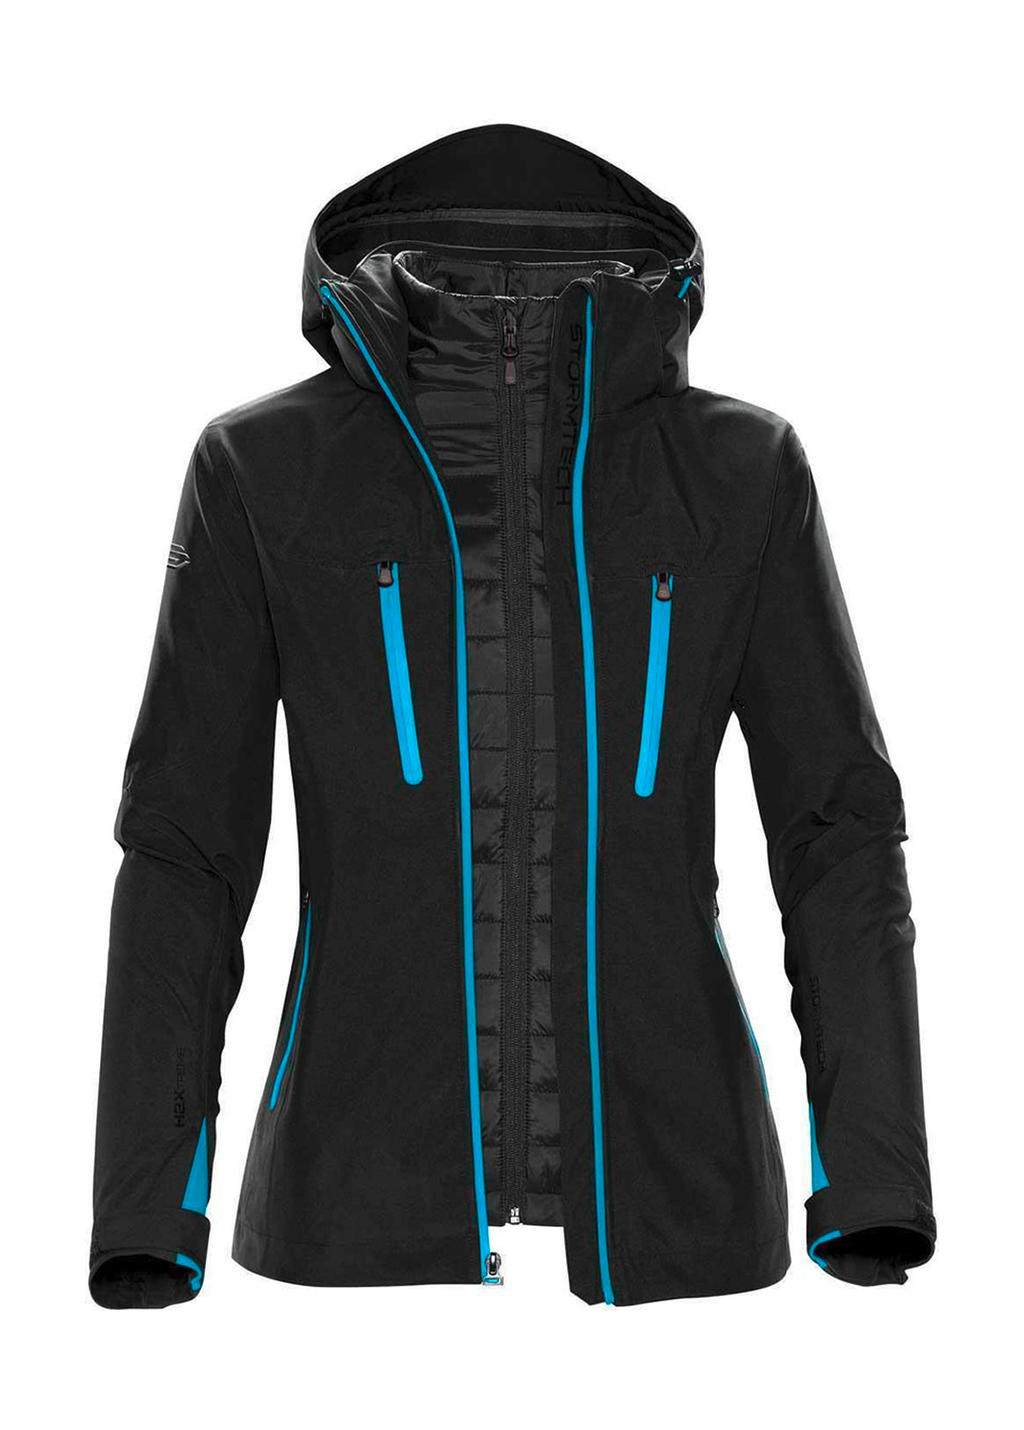  Womens Matrix System Jacket in Farbe Black/Electric